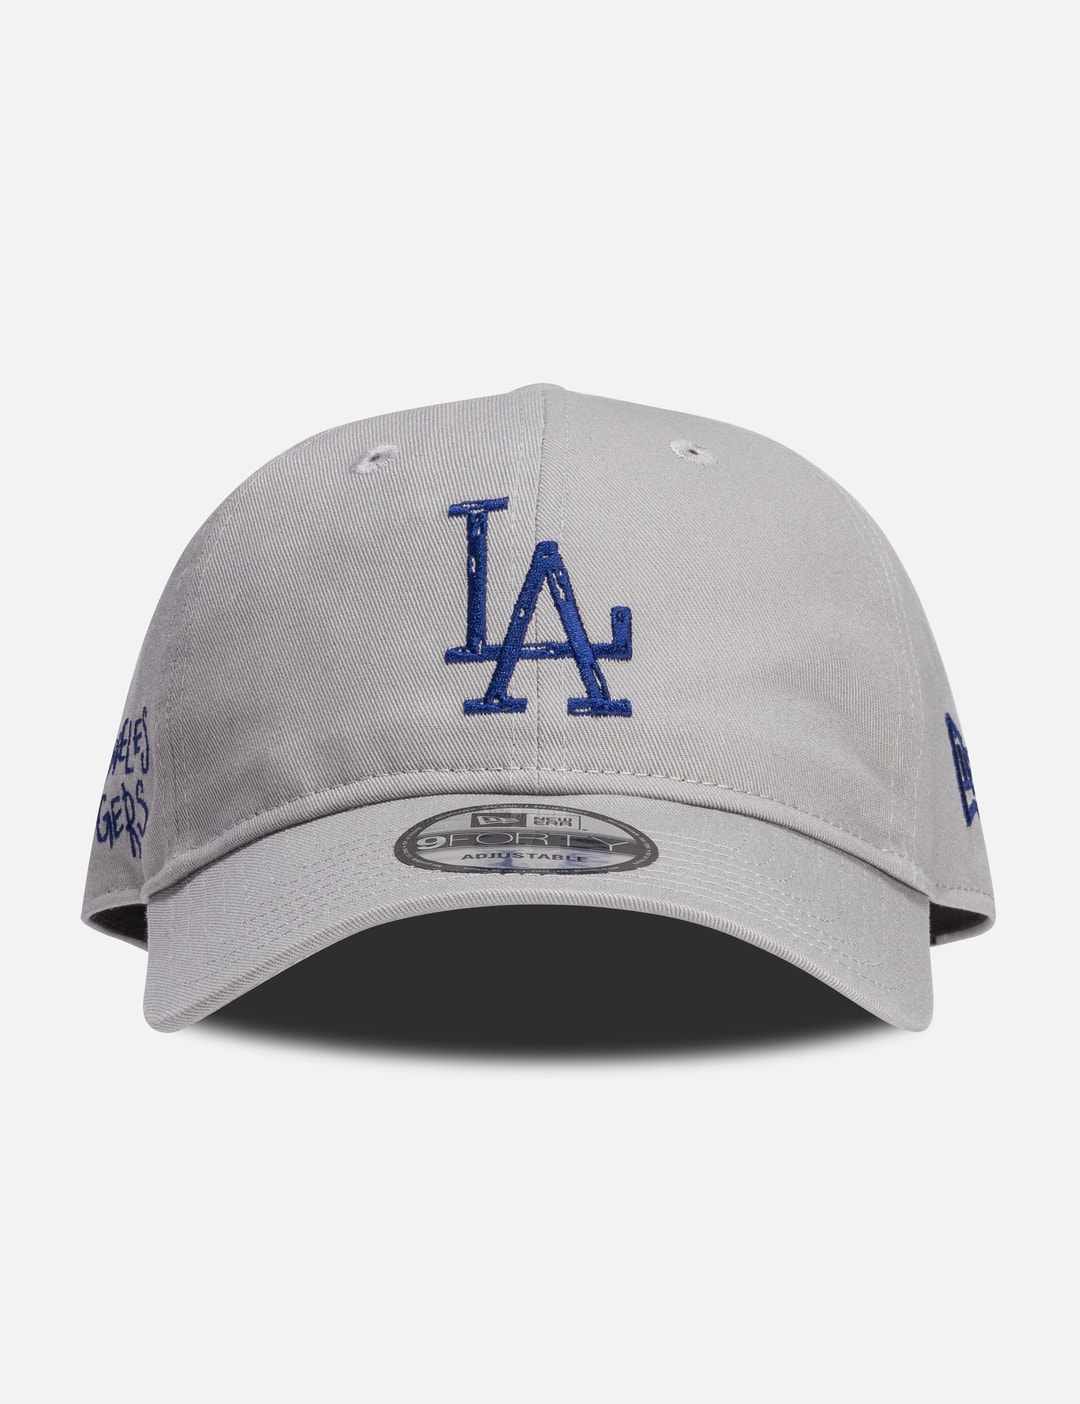 New Era - 9FORTY Adjustable Cap | HBX - Globally Curated Fashion and ...